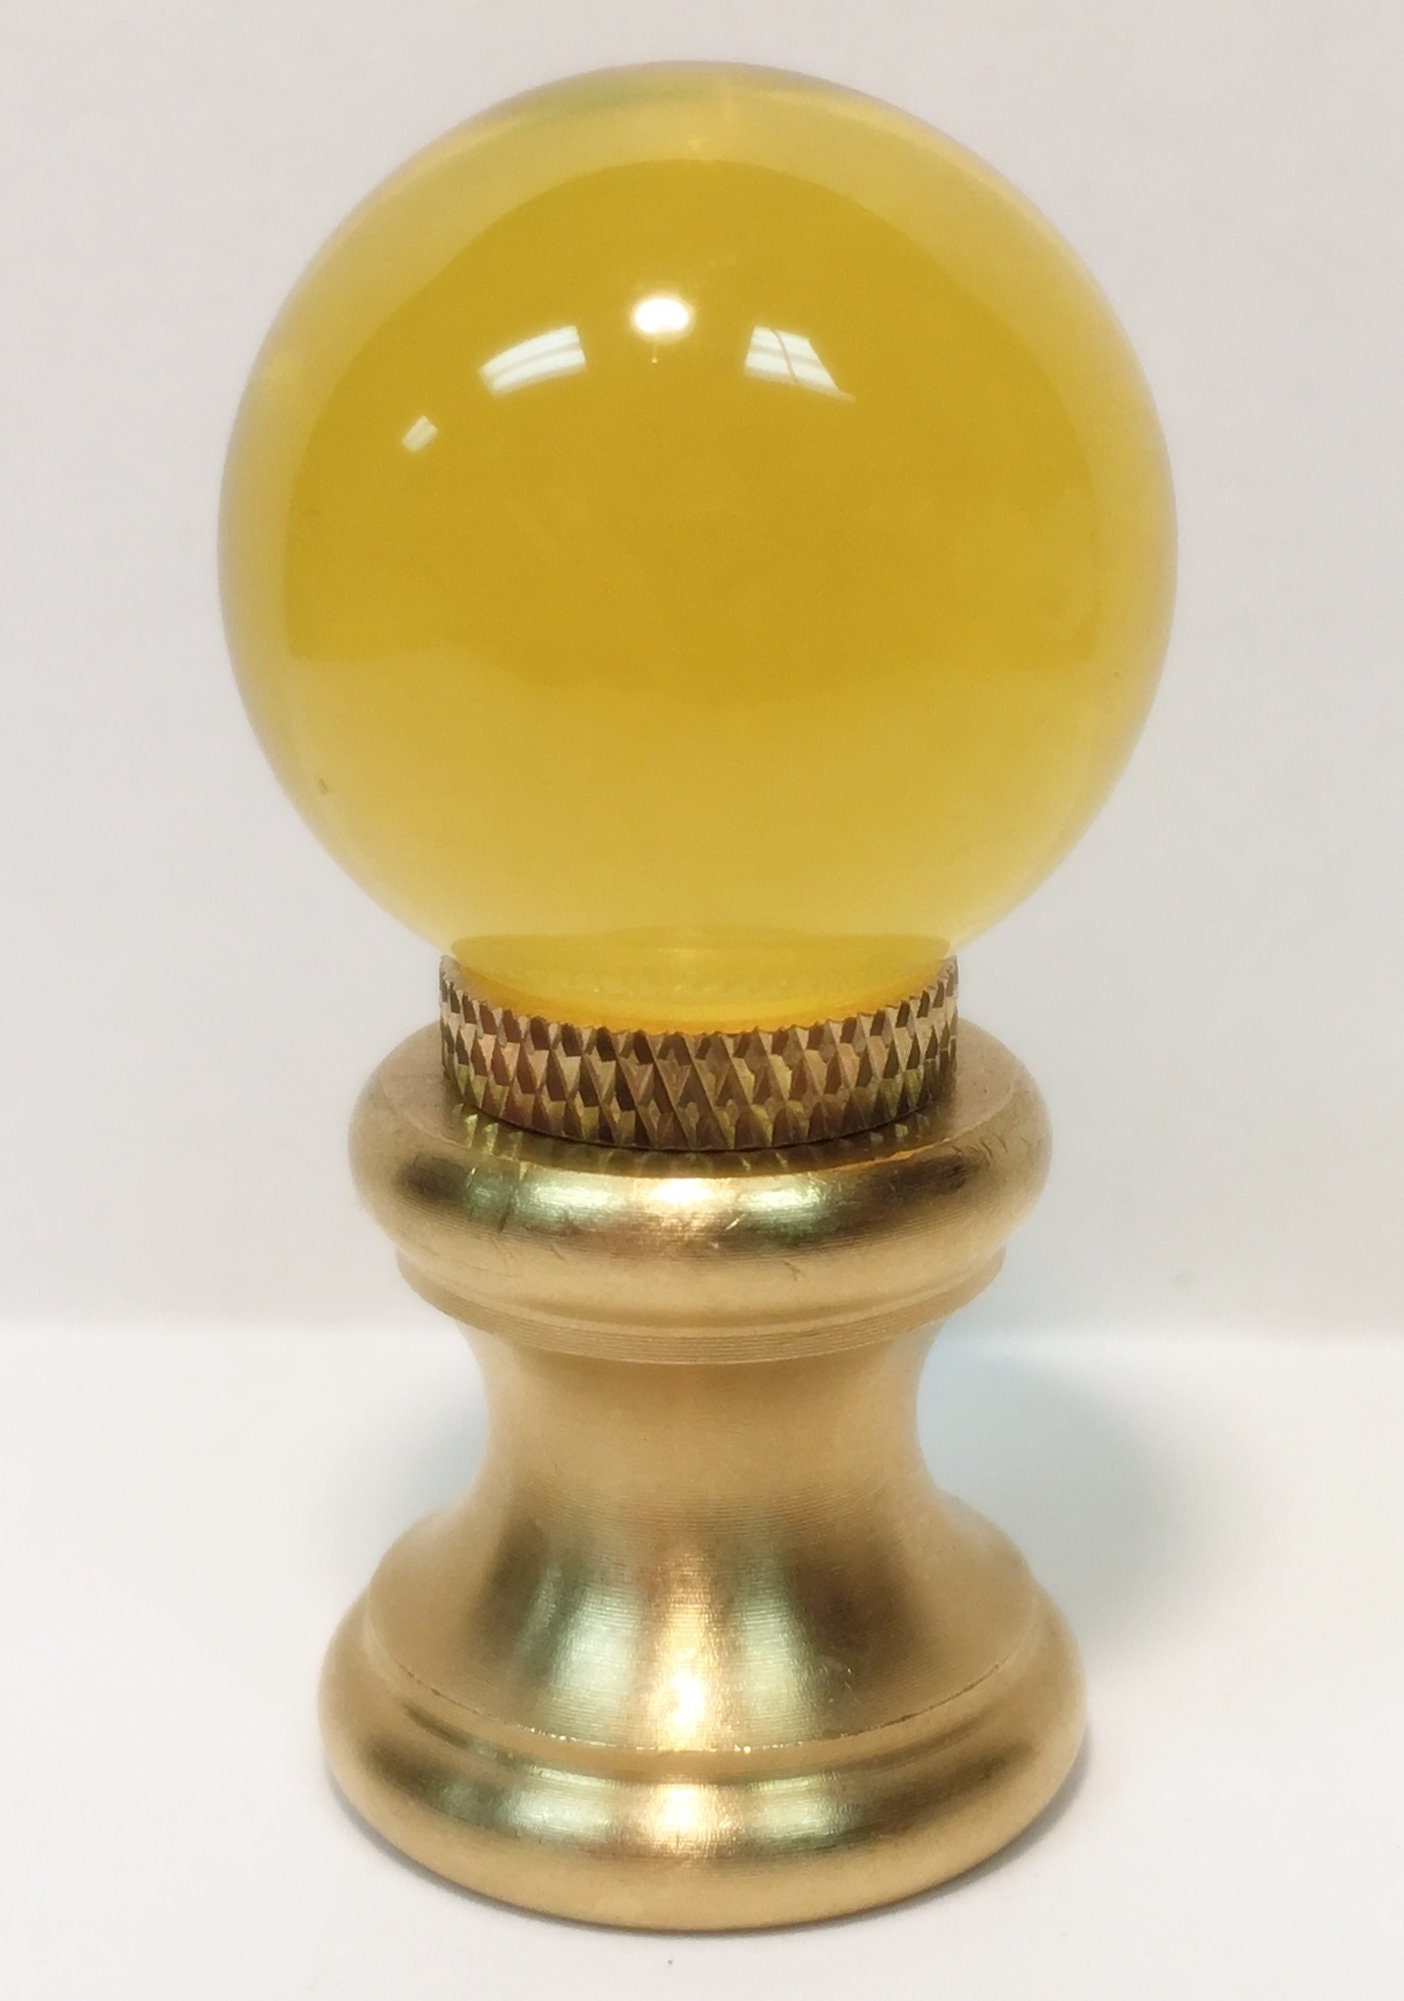 Shades Of Light Green & Brown Marbled Glass Orb Ball Lamp Topper Finial